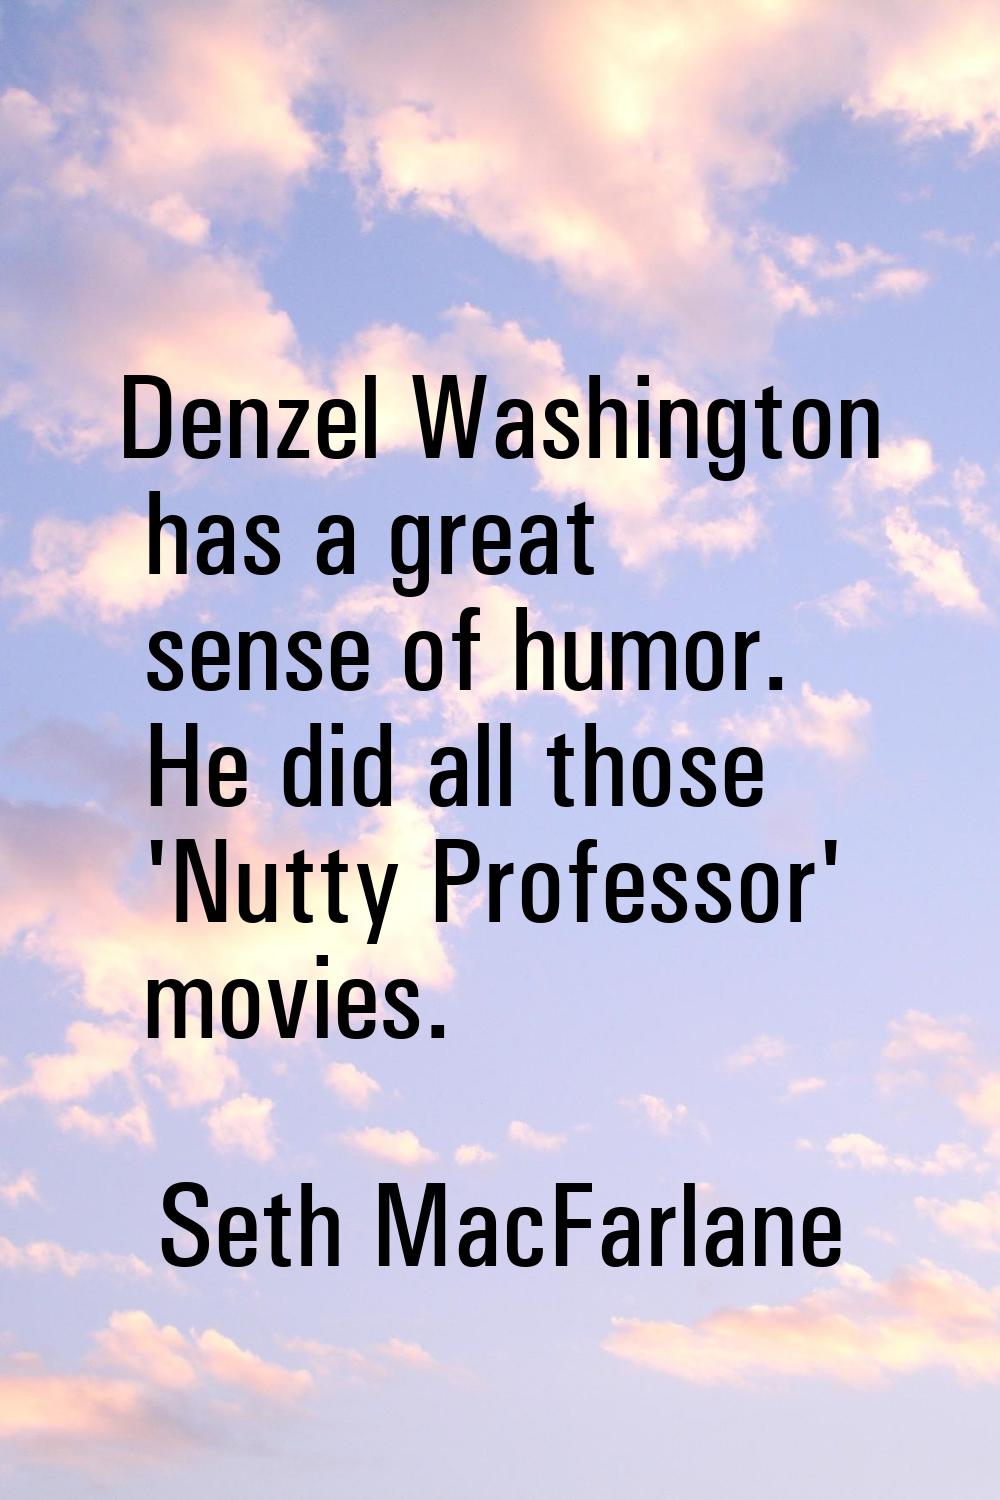 Denzel Washington has a great sense of humor. He did all those 'Nutty Professor' movies.